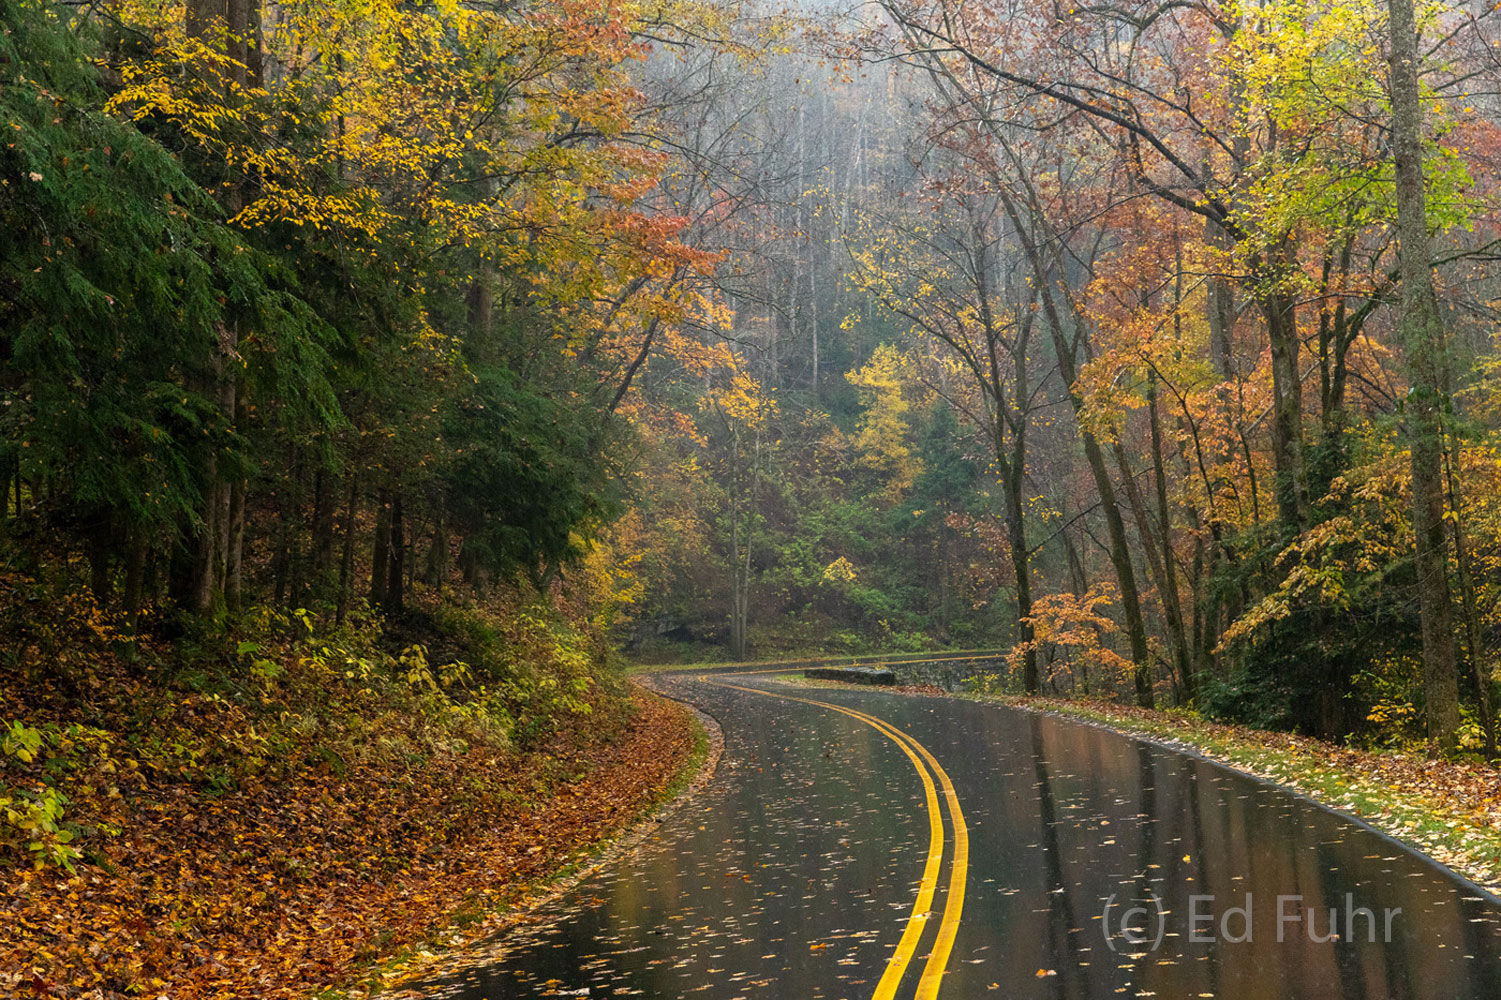 Laurel Creek Road is beautiful in fall but especially after a modest rain that saturates the colors, creates reflections and...